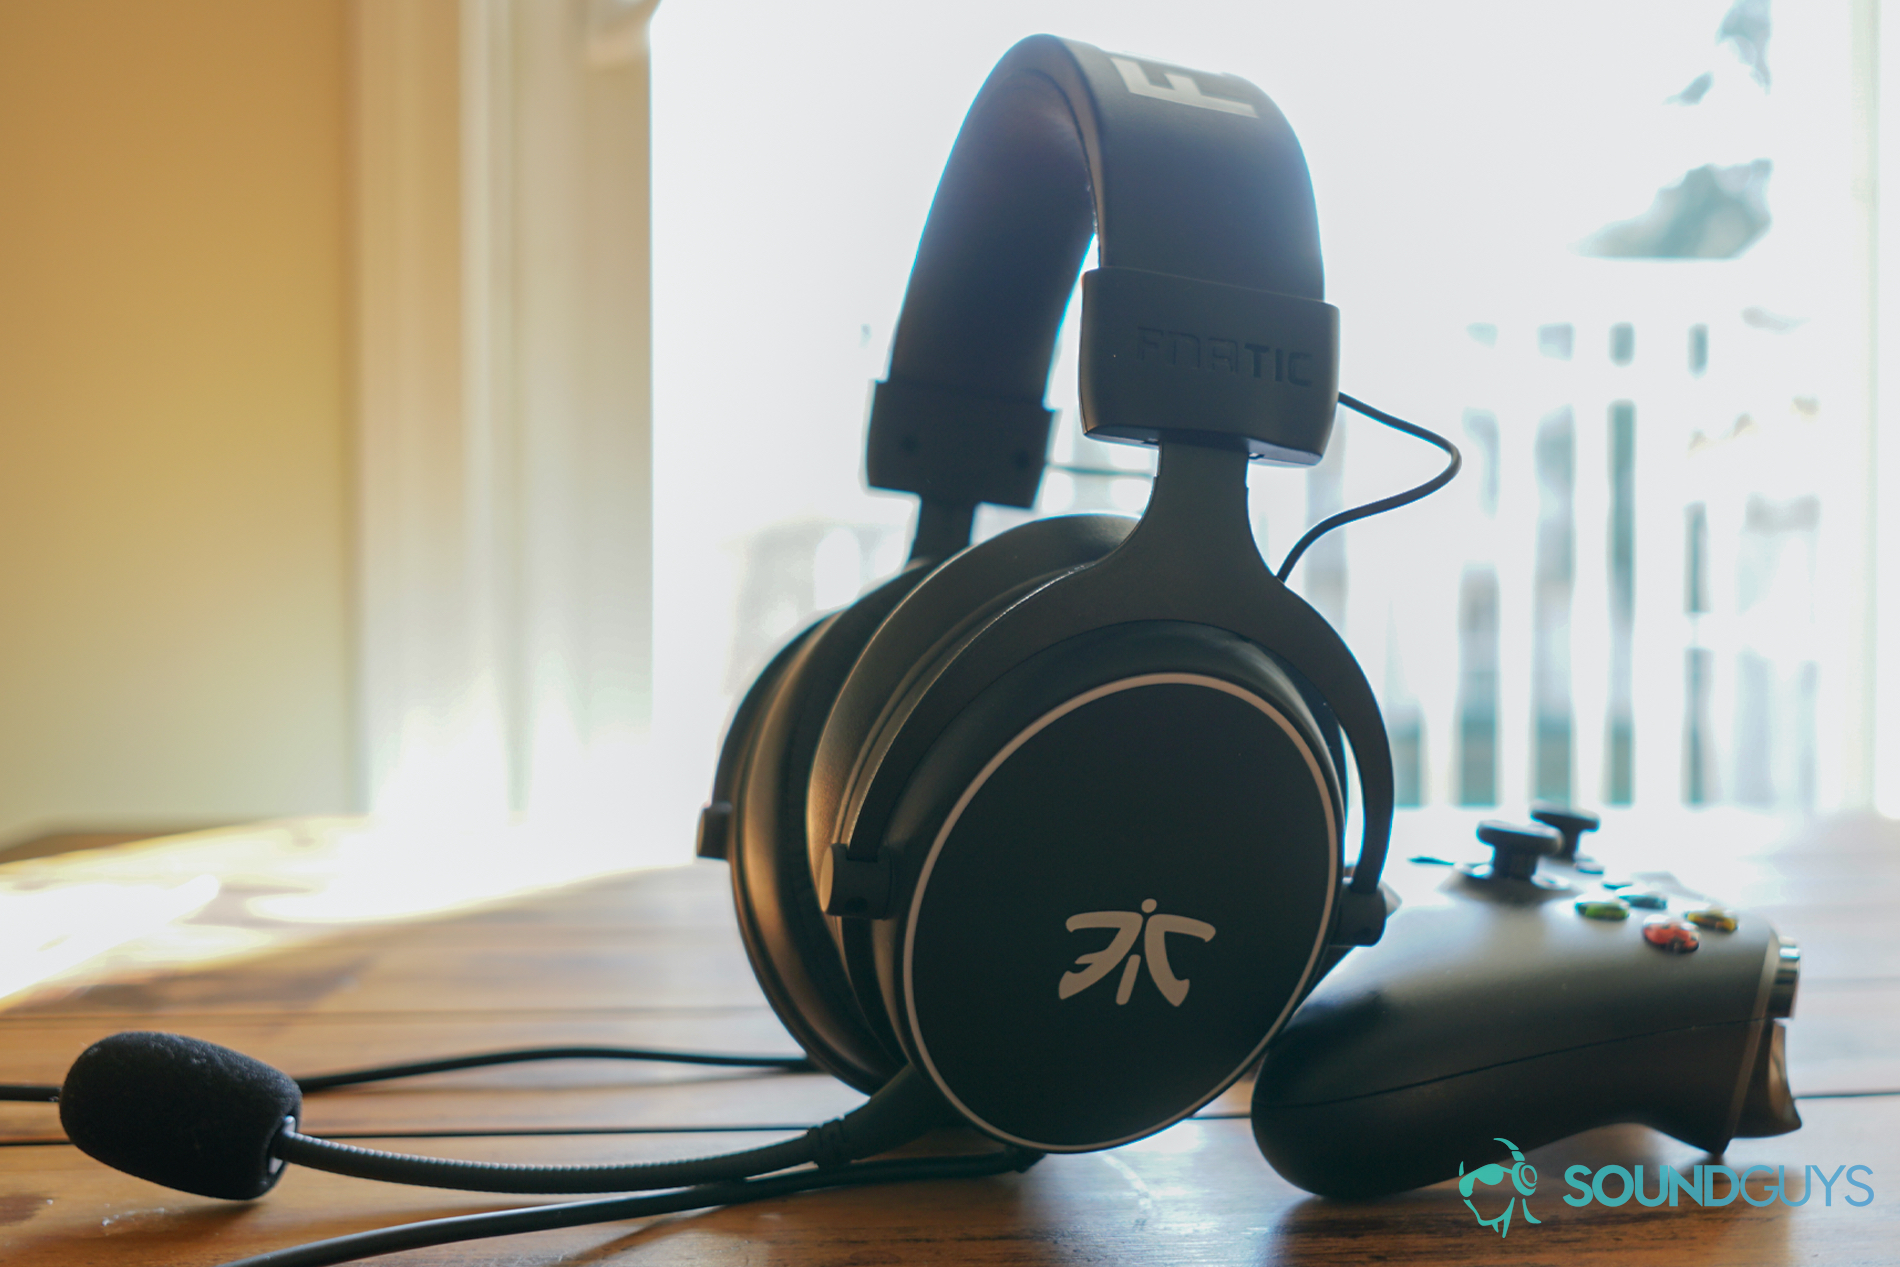 The fnatic react gaming headset sits on a wooden table by a window leaning on an Xbox One controller.